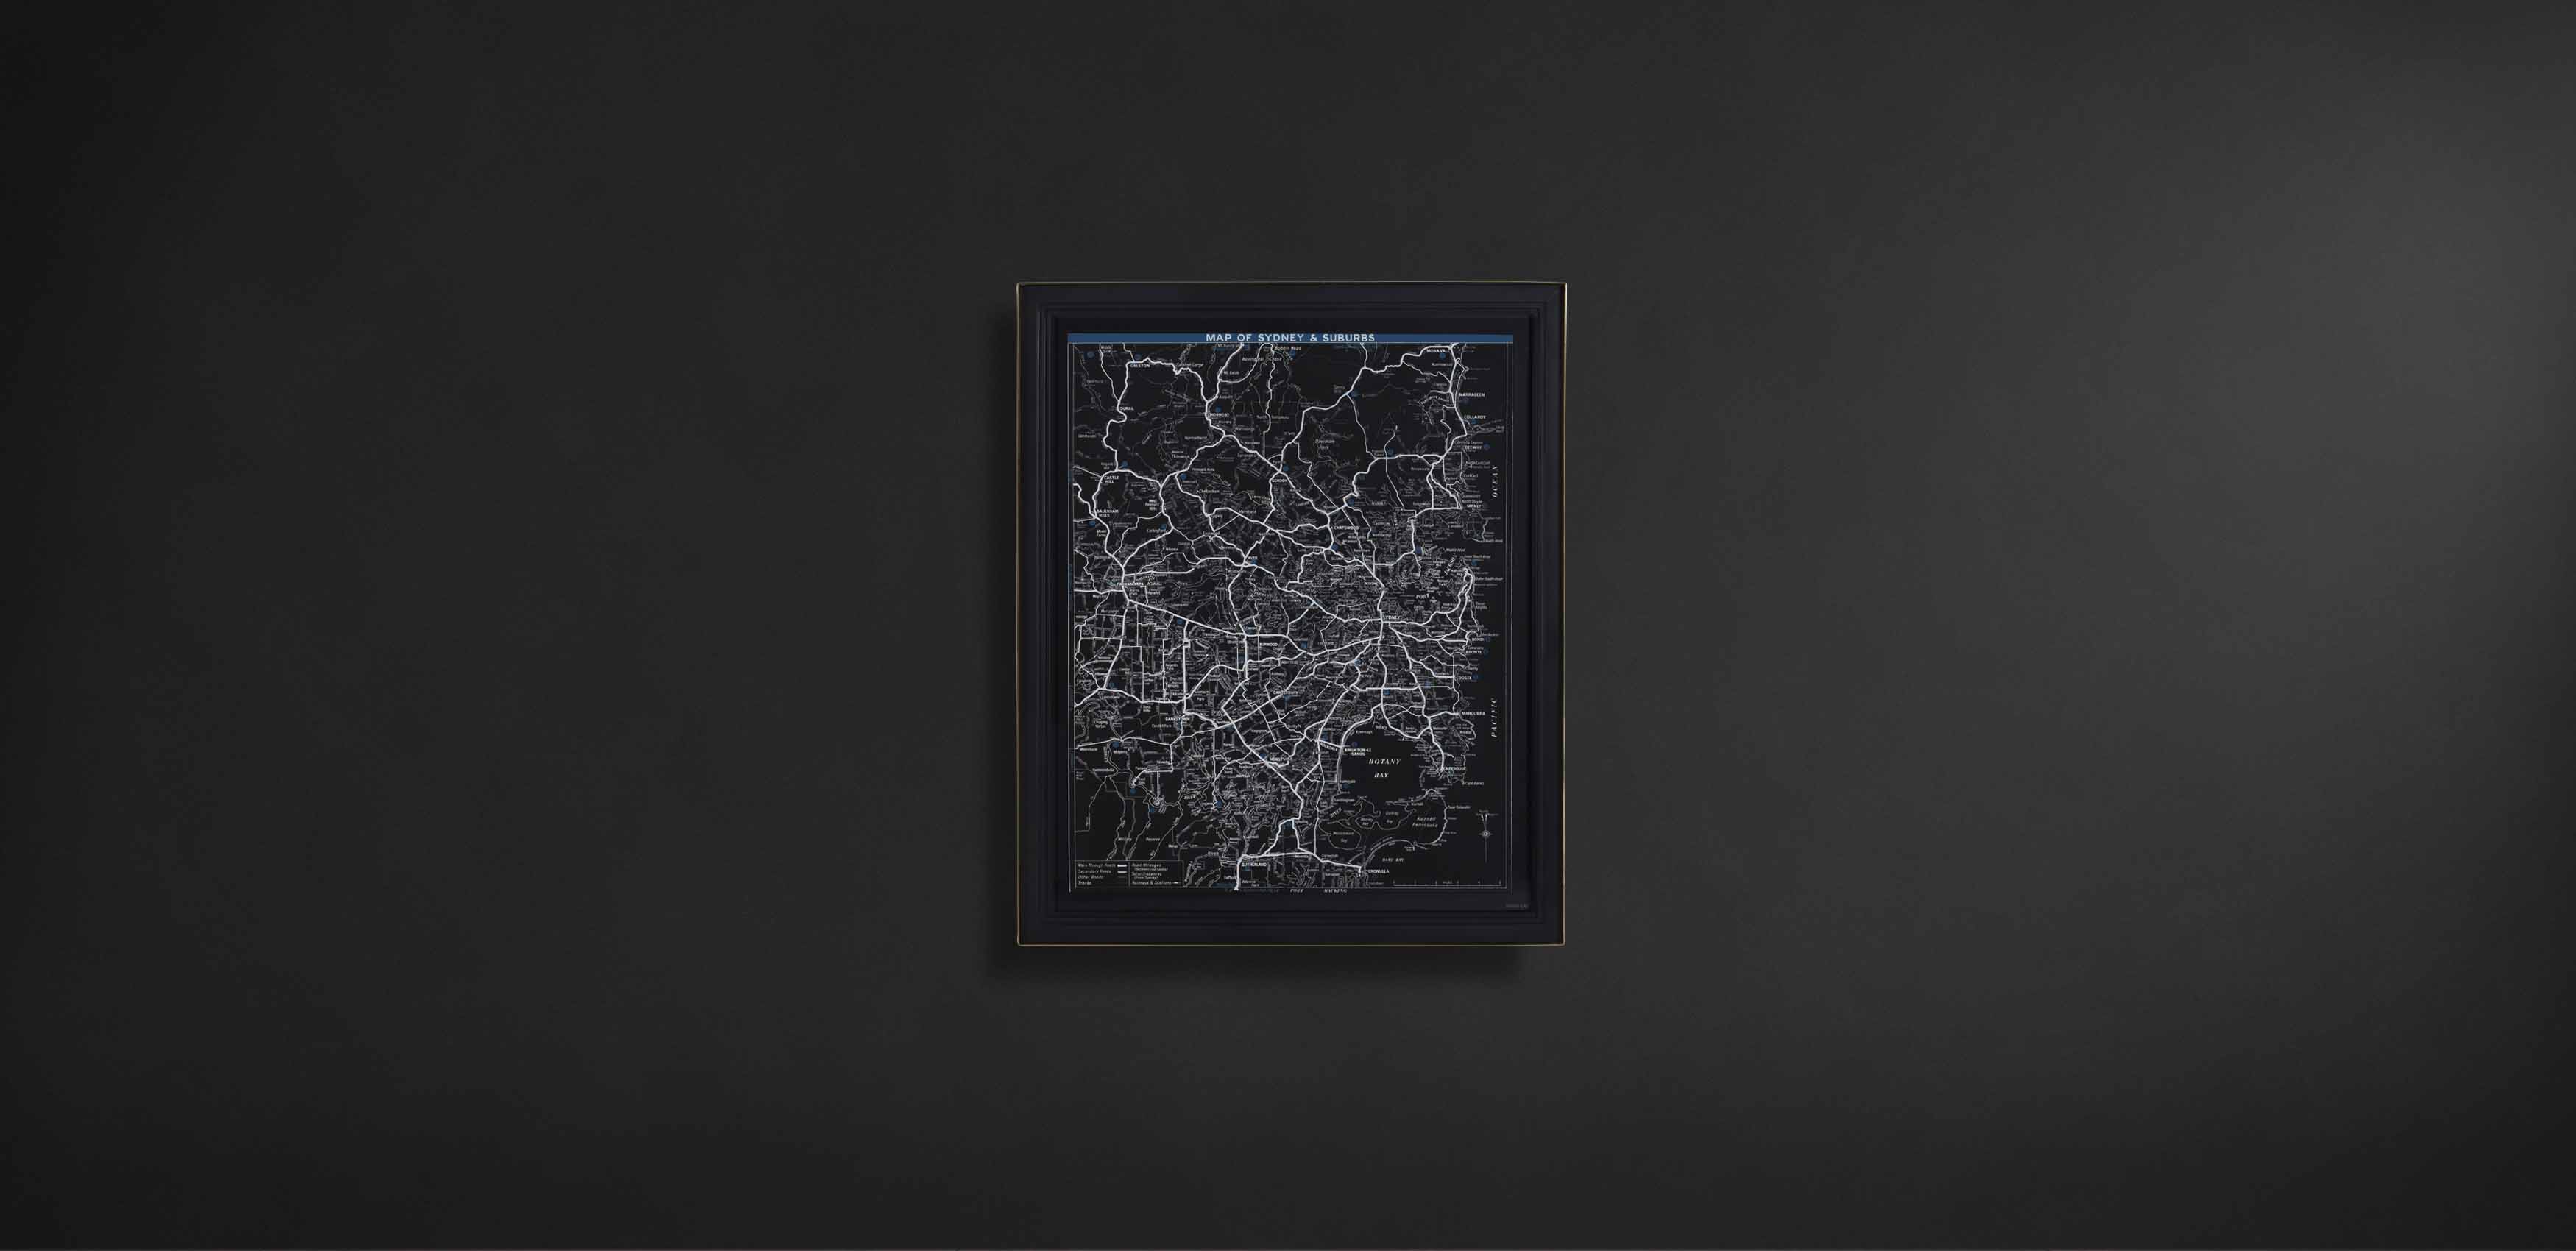 Savoy Map – London Our New Savoy Maps Selection Presents Each City From A Modern, Monochromatic